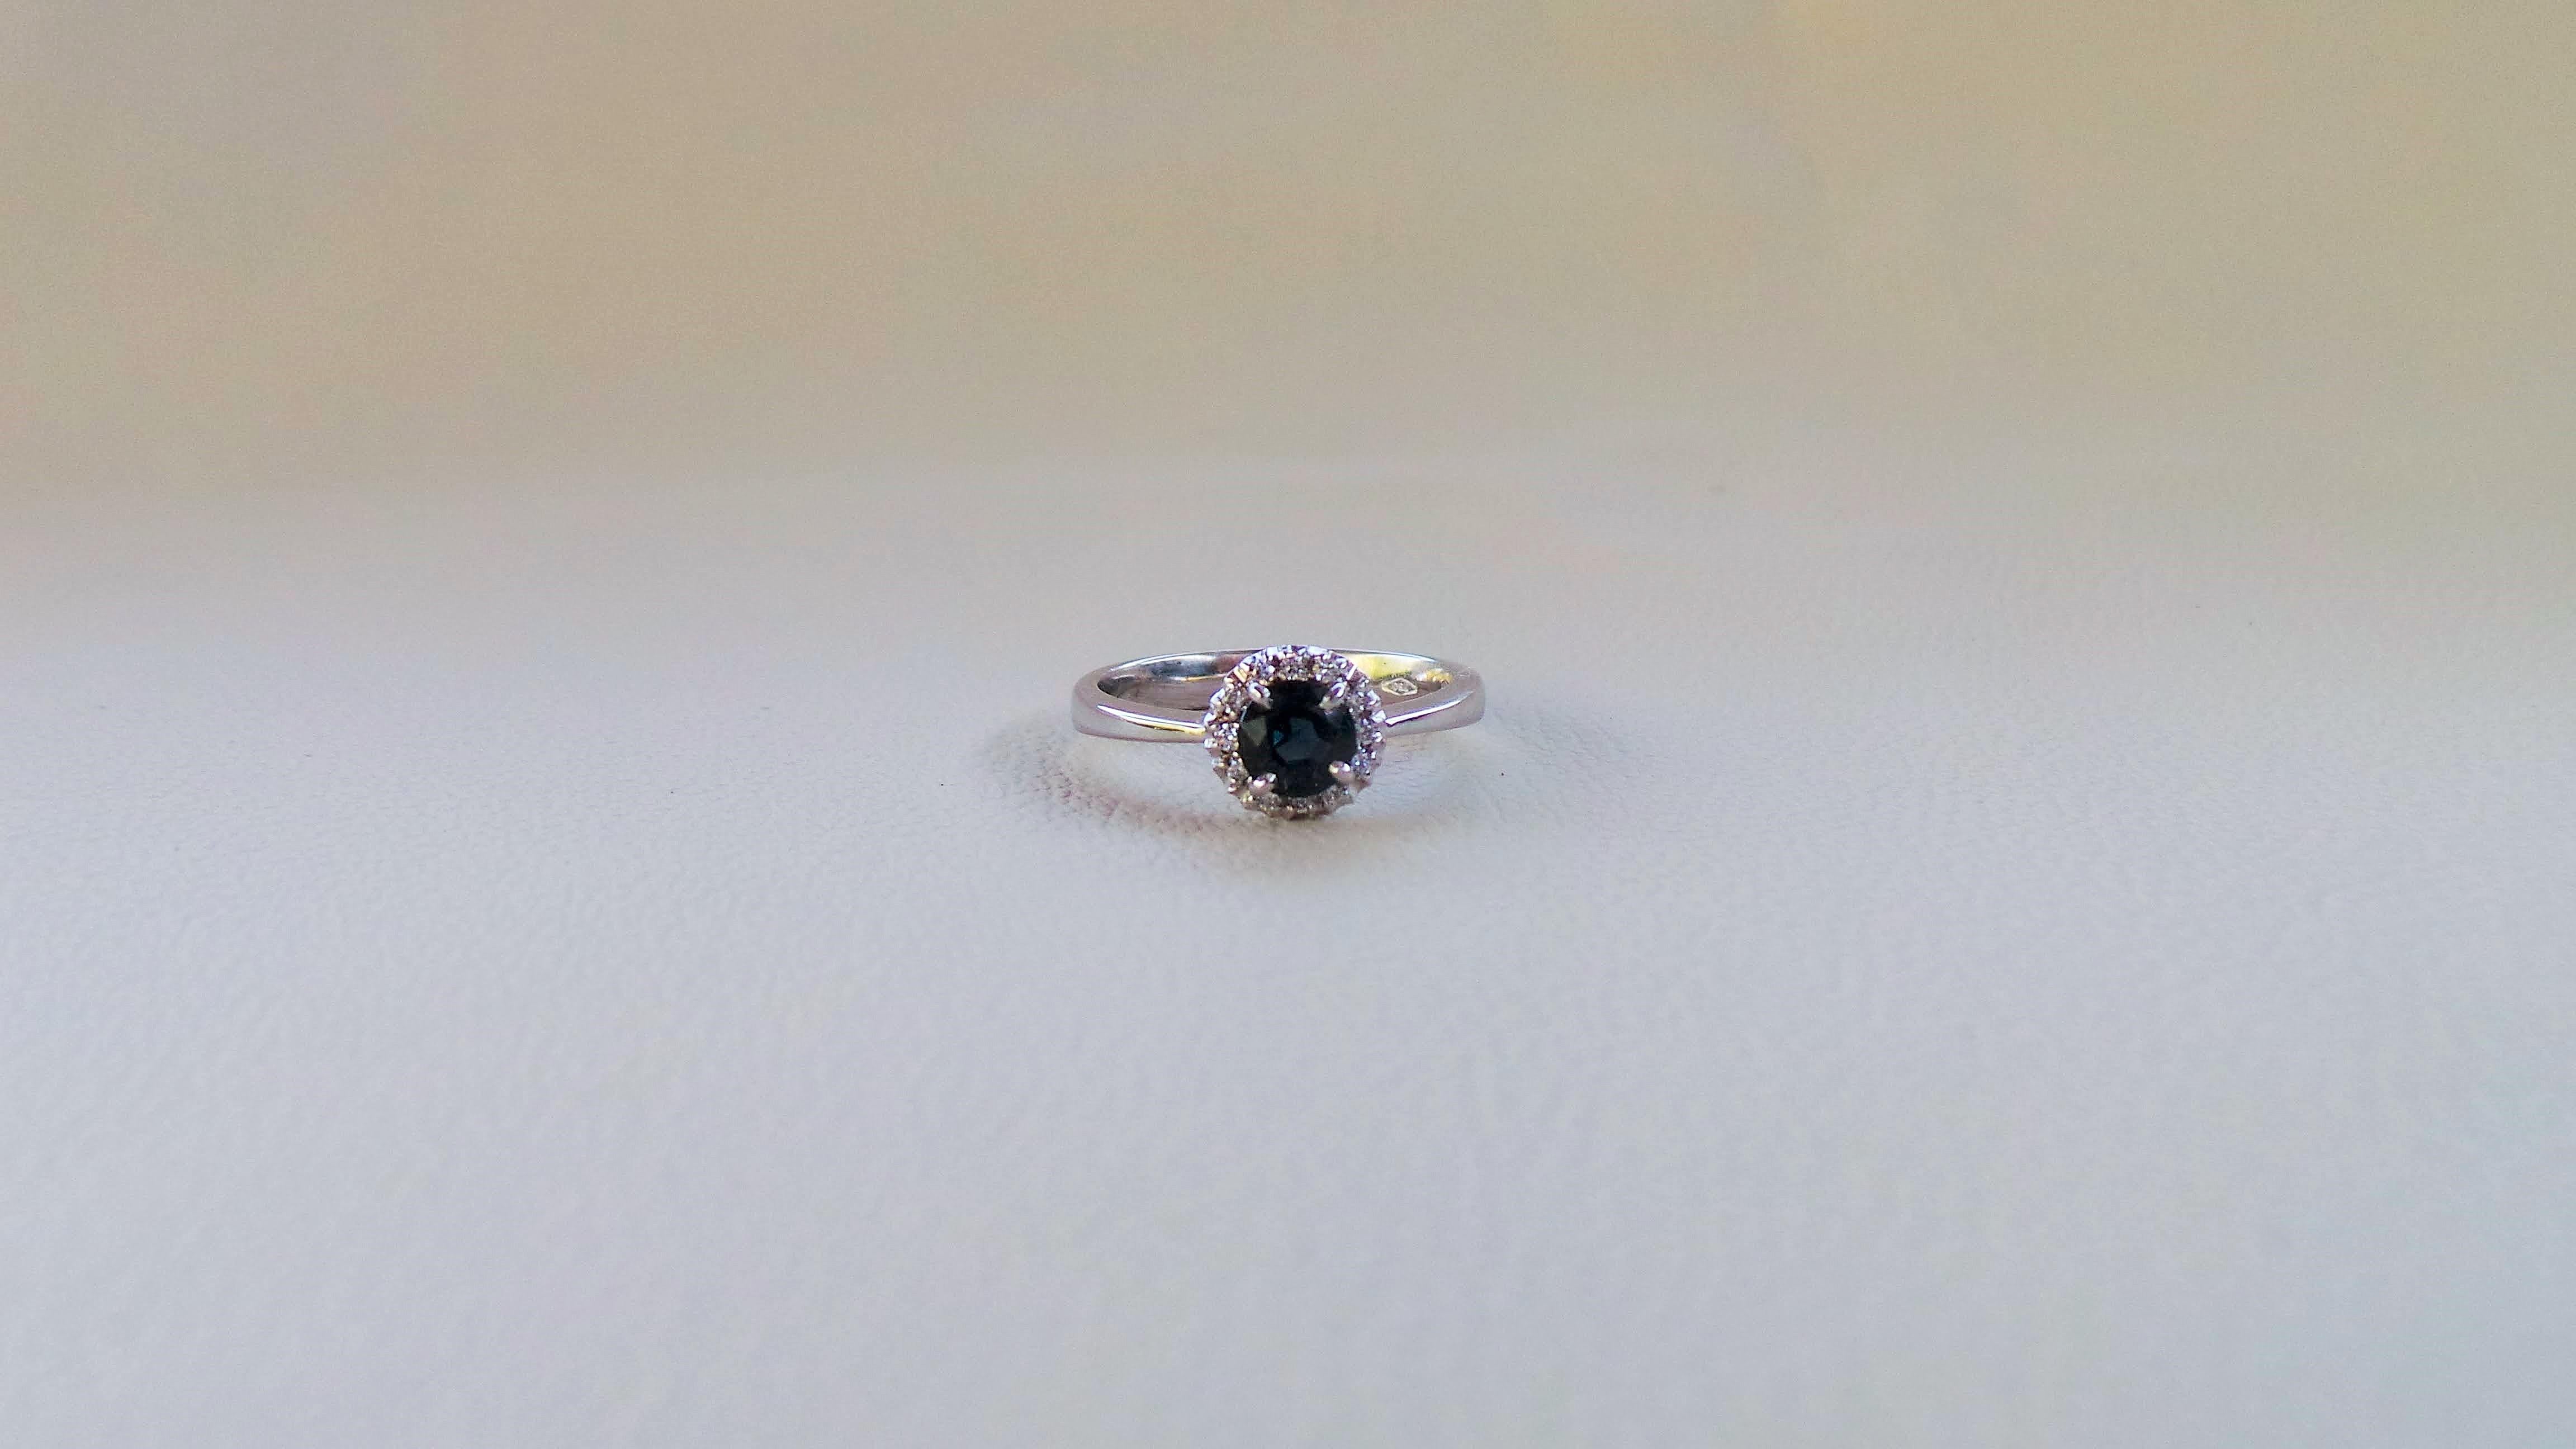 Andrea Macinai design a dedicated collection for engament rings  with a beautiful dark blue sapphire round and diamonds.
Designed and built the ring following the natural line of the stone.
0.6 carat round sapphire blue complimented by 12 round